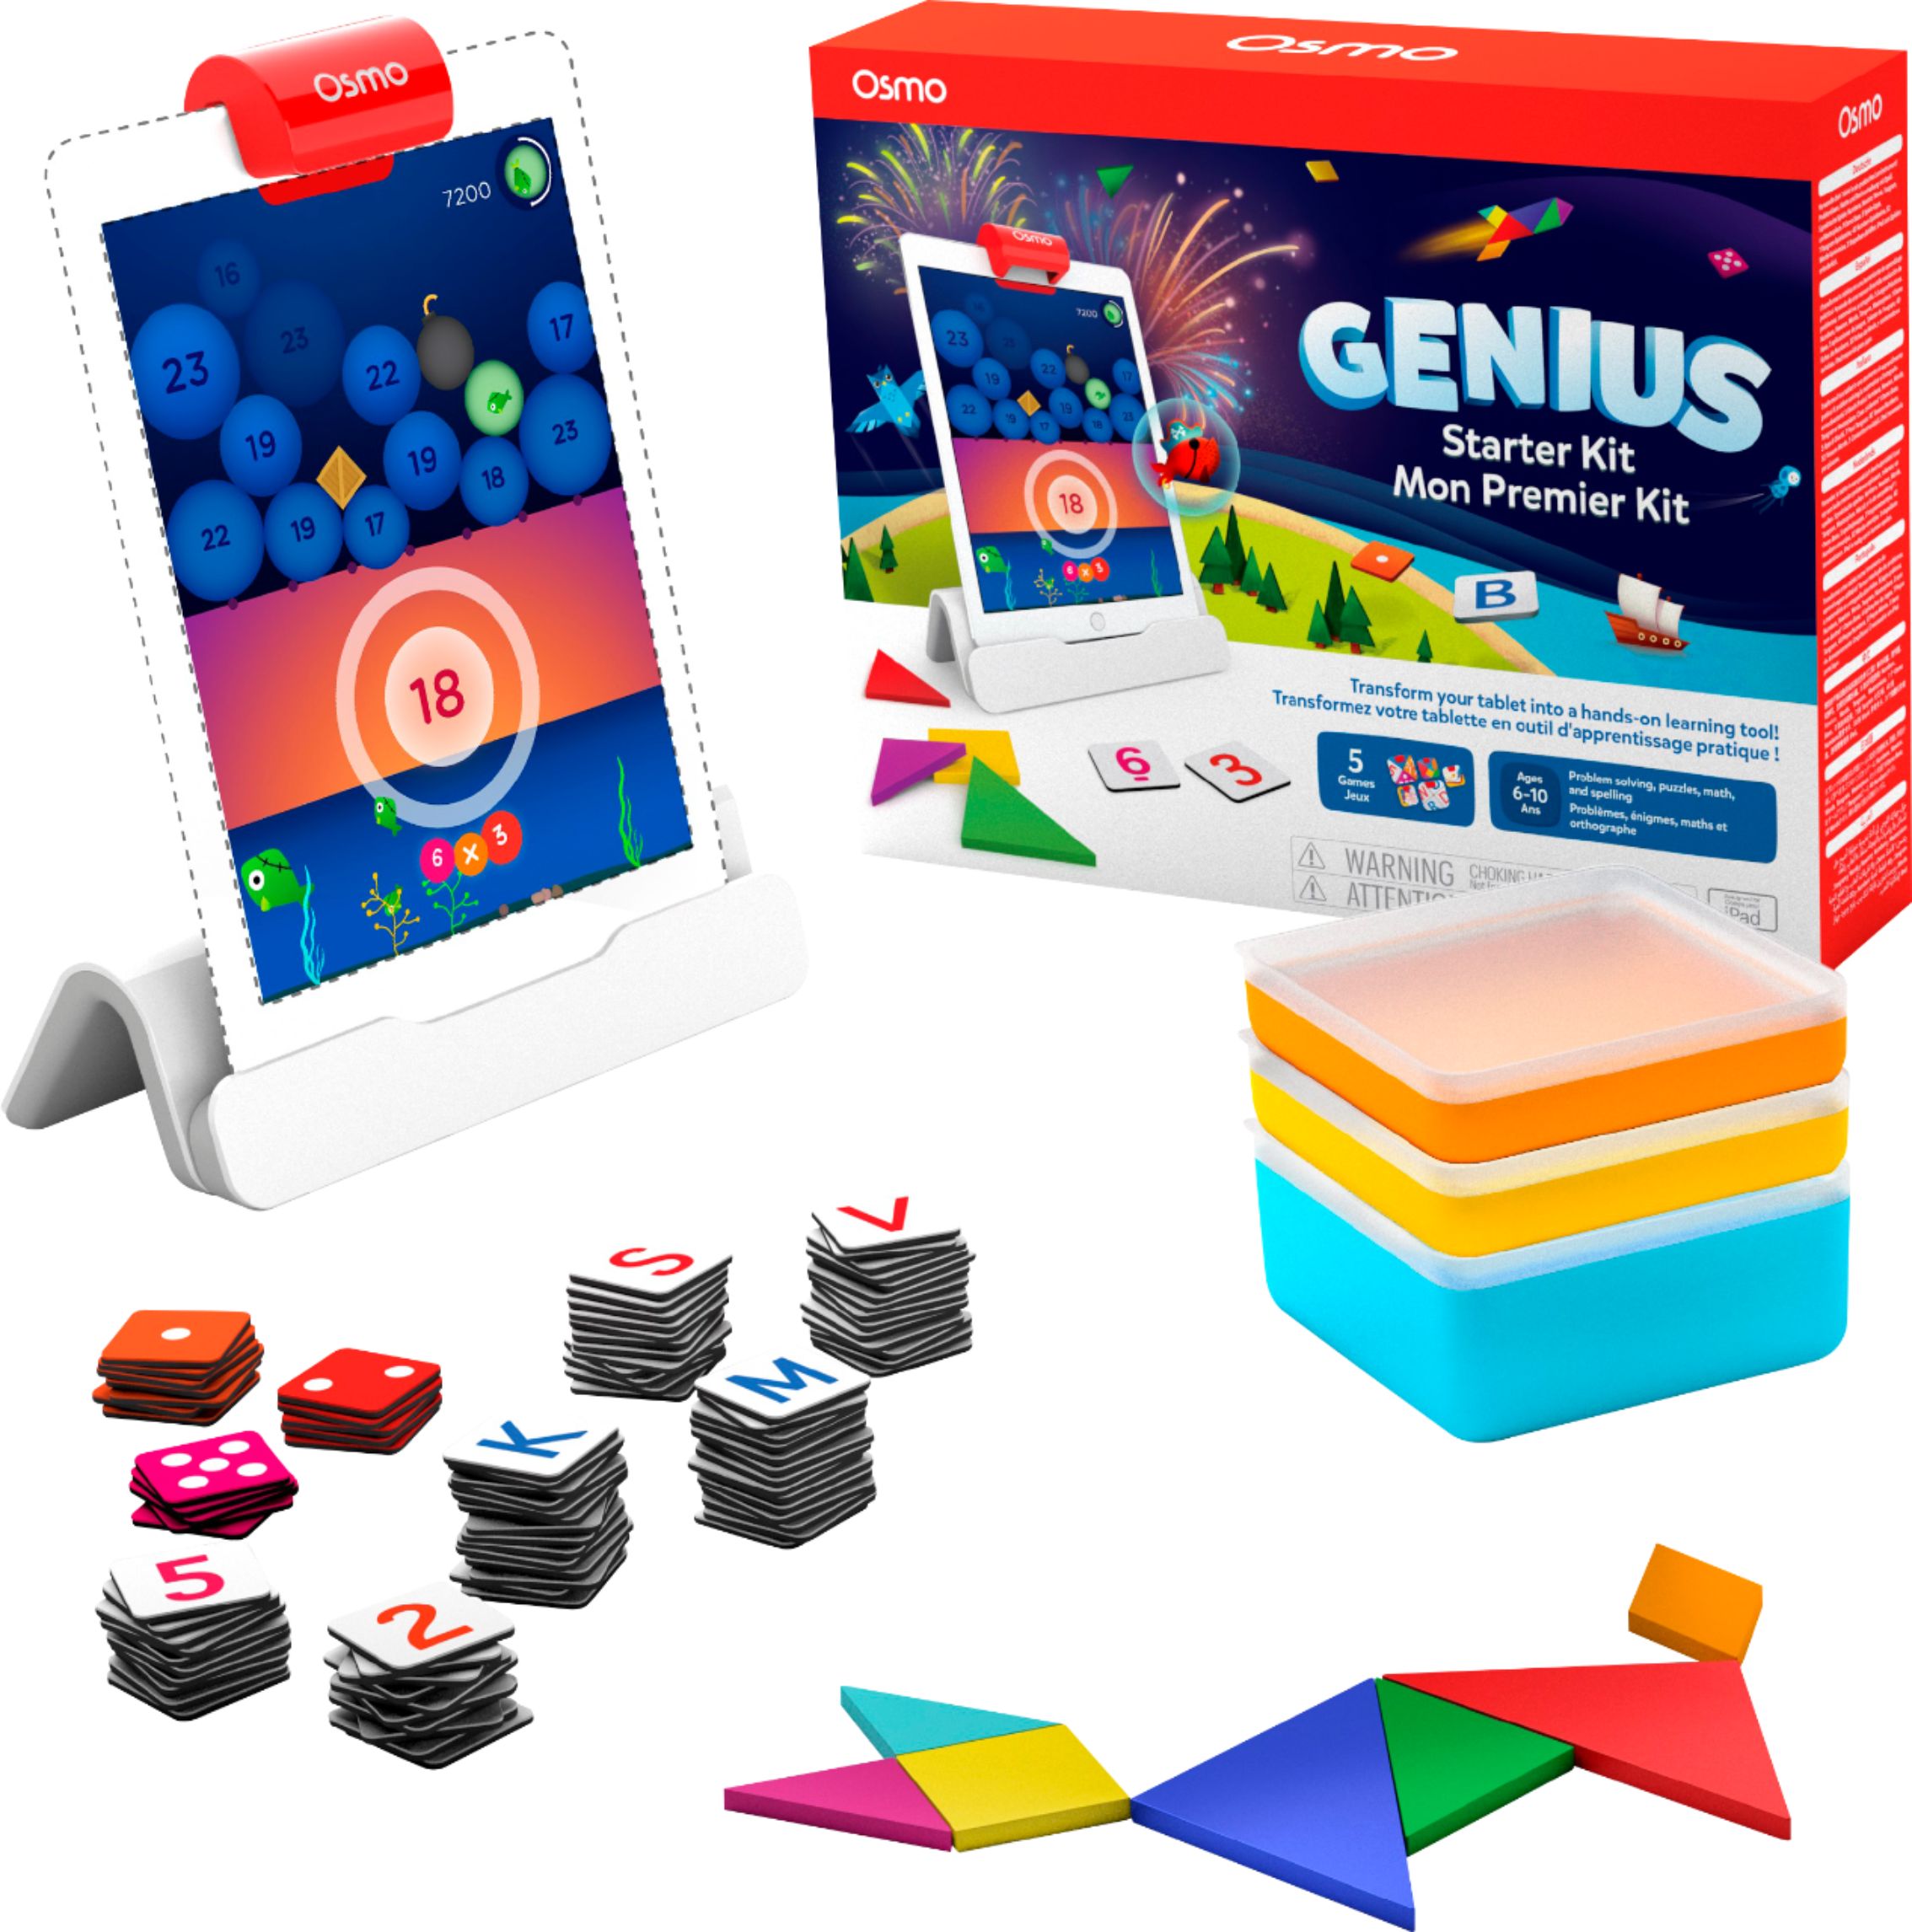 NEW VERSION Osmo Osmo Base Included - Ages 6-10 - Genius Starter Kit for iPad 